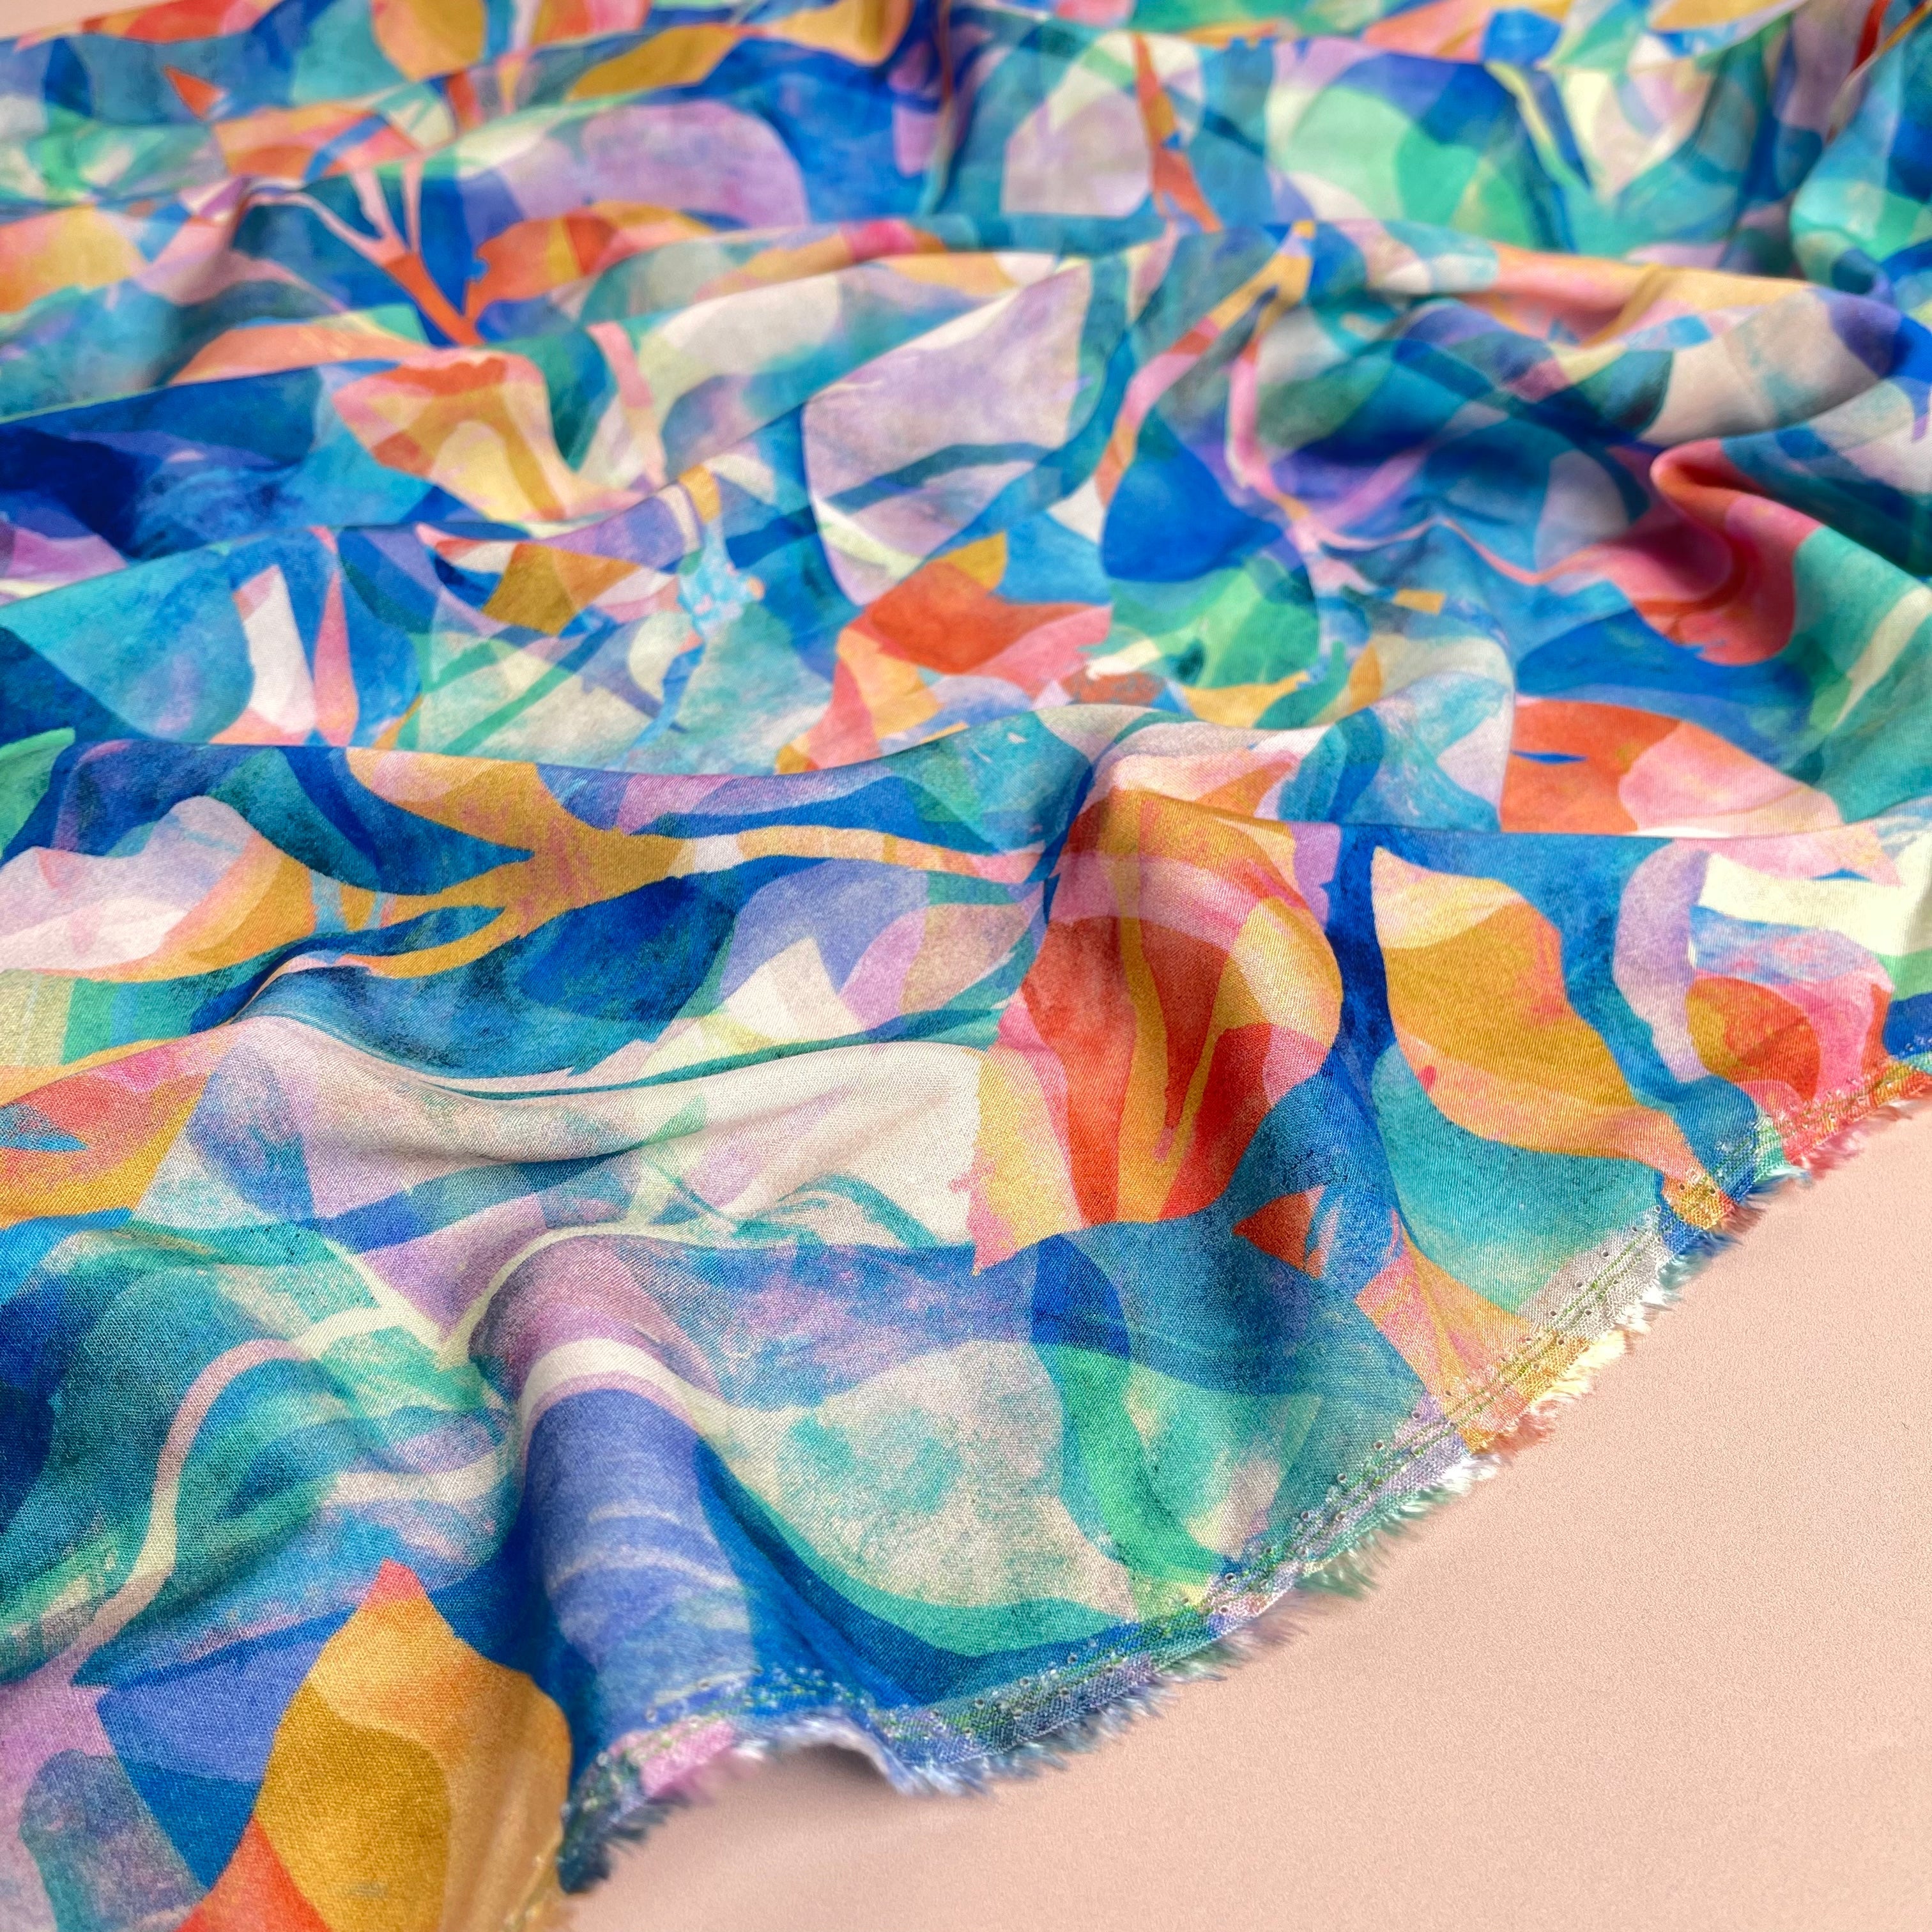 REMNANT 1 Metre - Summer Party - Painted Foliage Coast Viscose Fabric